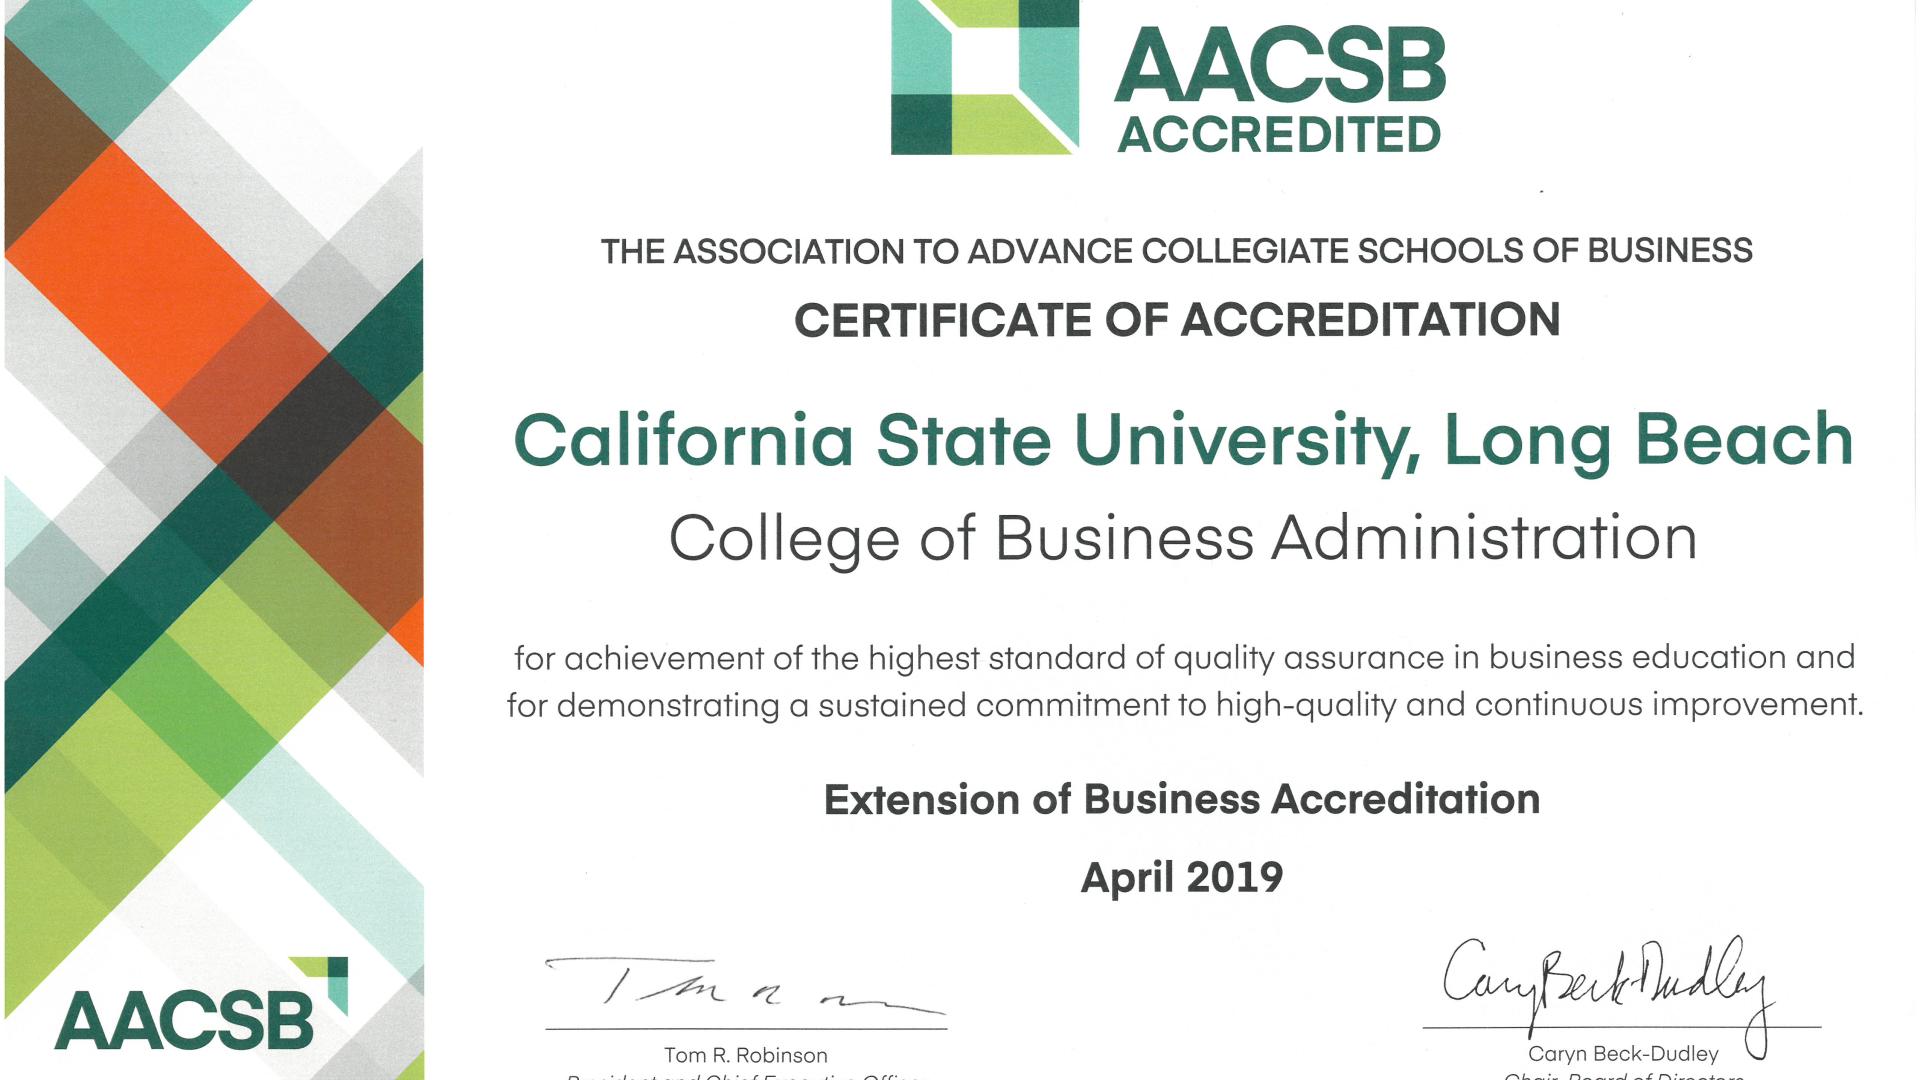 AACSB Official Certification document Dated MAY 2019